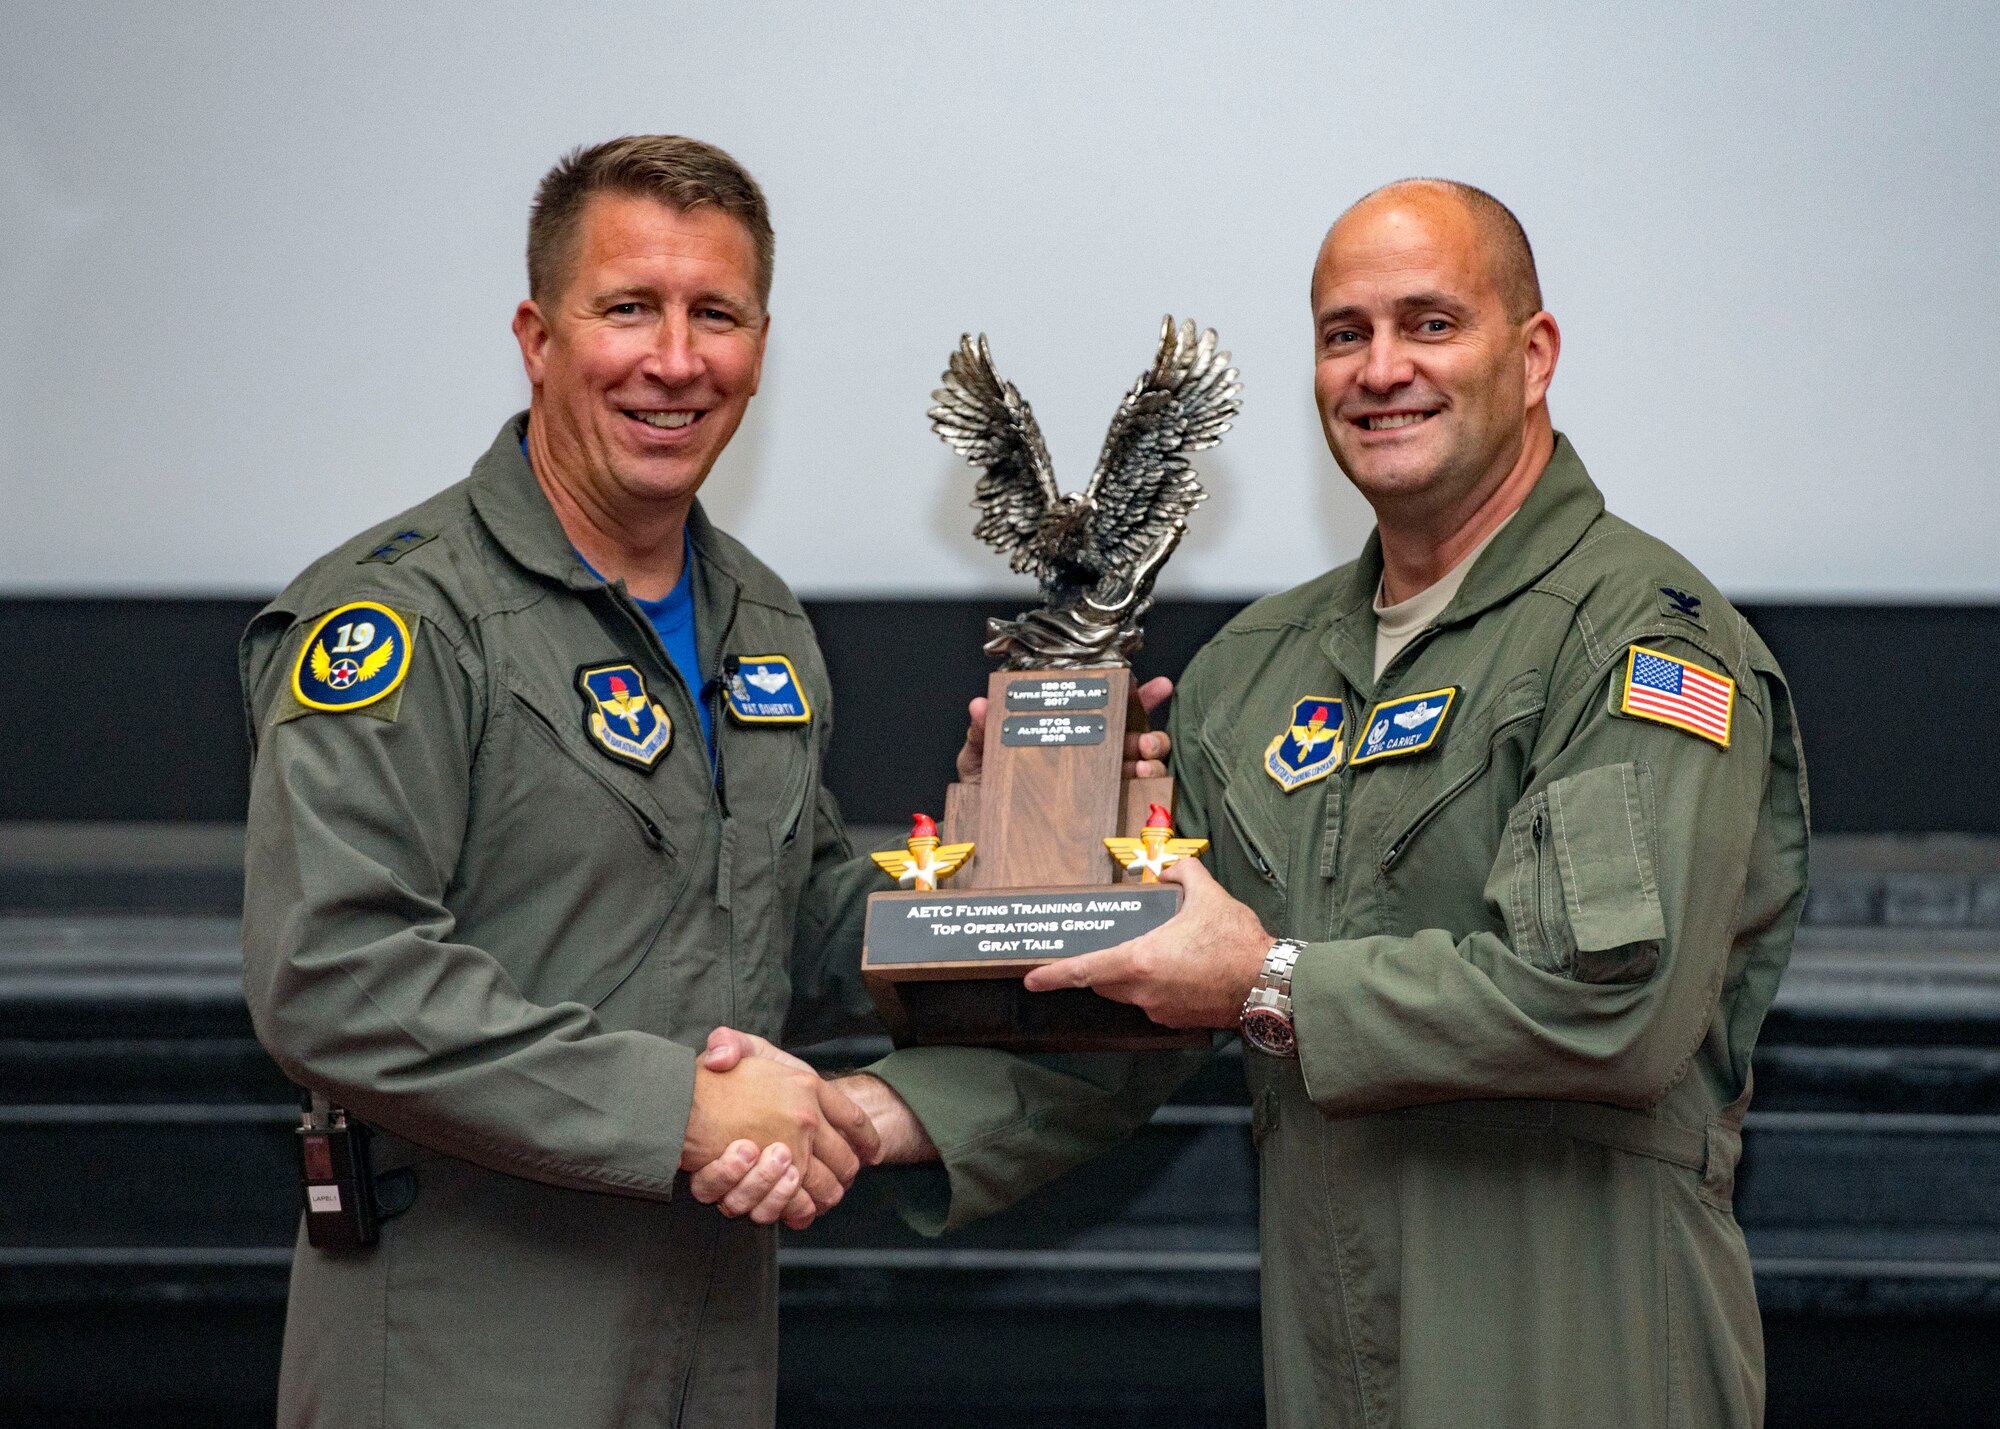 Maj. Gen. Patrick Doherty, 19th Air Force commander, presents the Top Operations Group-Gray Tail Division Award to the 97th Operations Group during the Air Education and Training Command Flying Training Awards Ceremony Oct. 26, 2018, at Joint Base San Antonio-Randolph, Texas. The award ceremony recognizes individuals, squadrons, groups and wings whose efforts have led to the highest levels of student production.